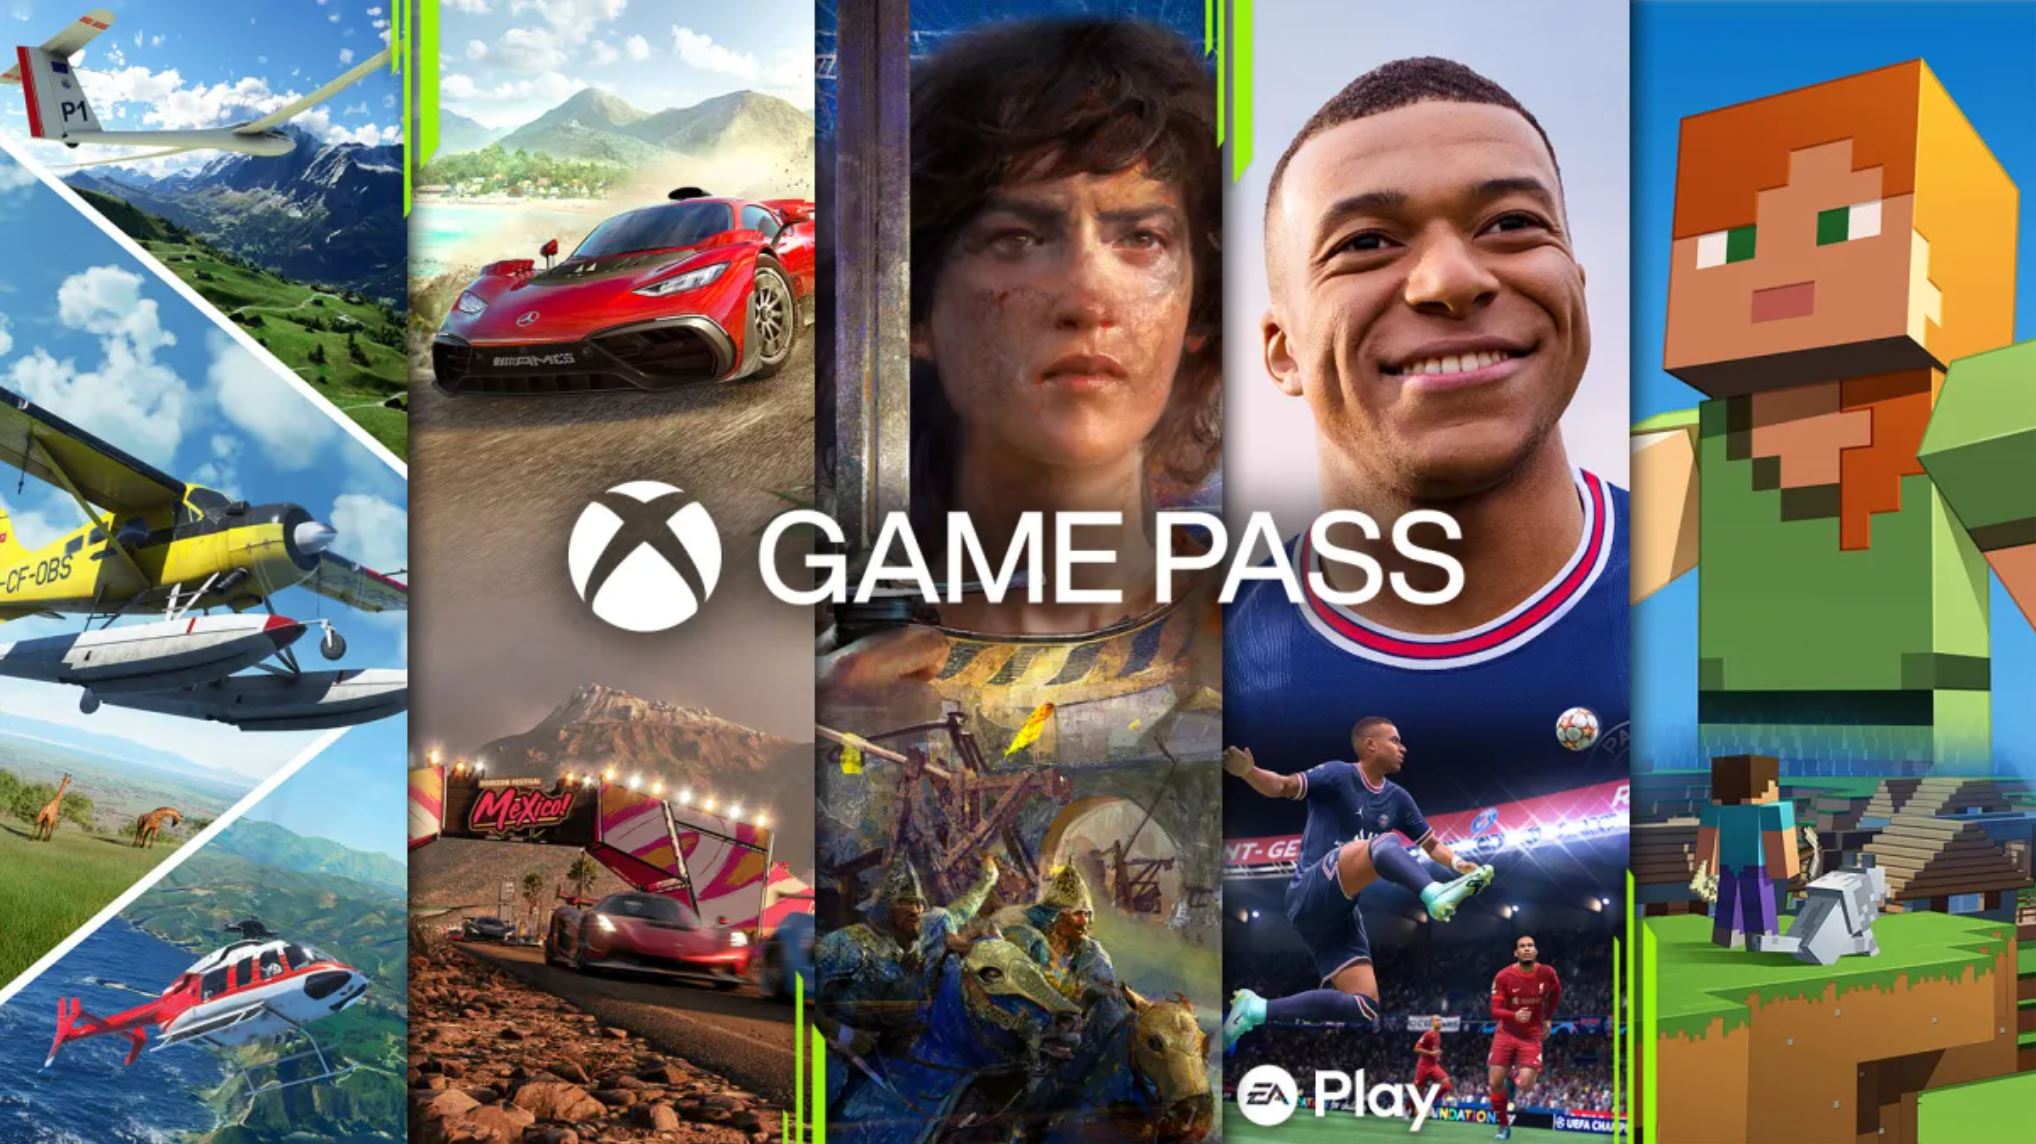 PC Game Pass reaches 40 new countries including 11 new Latin American countries